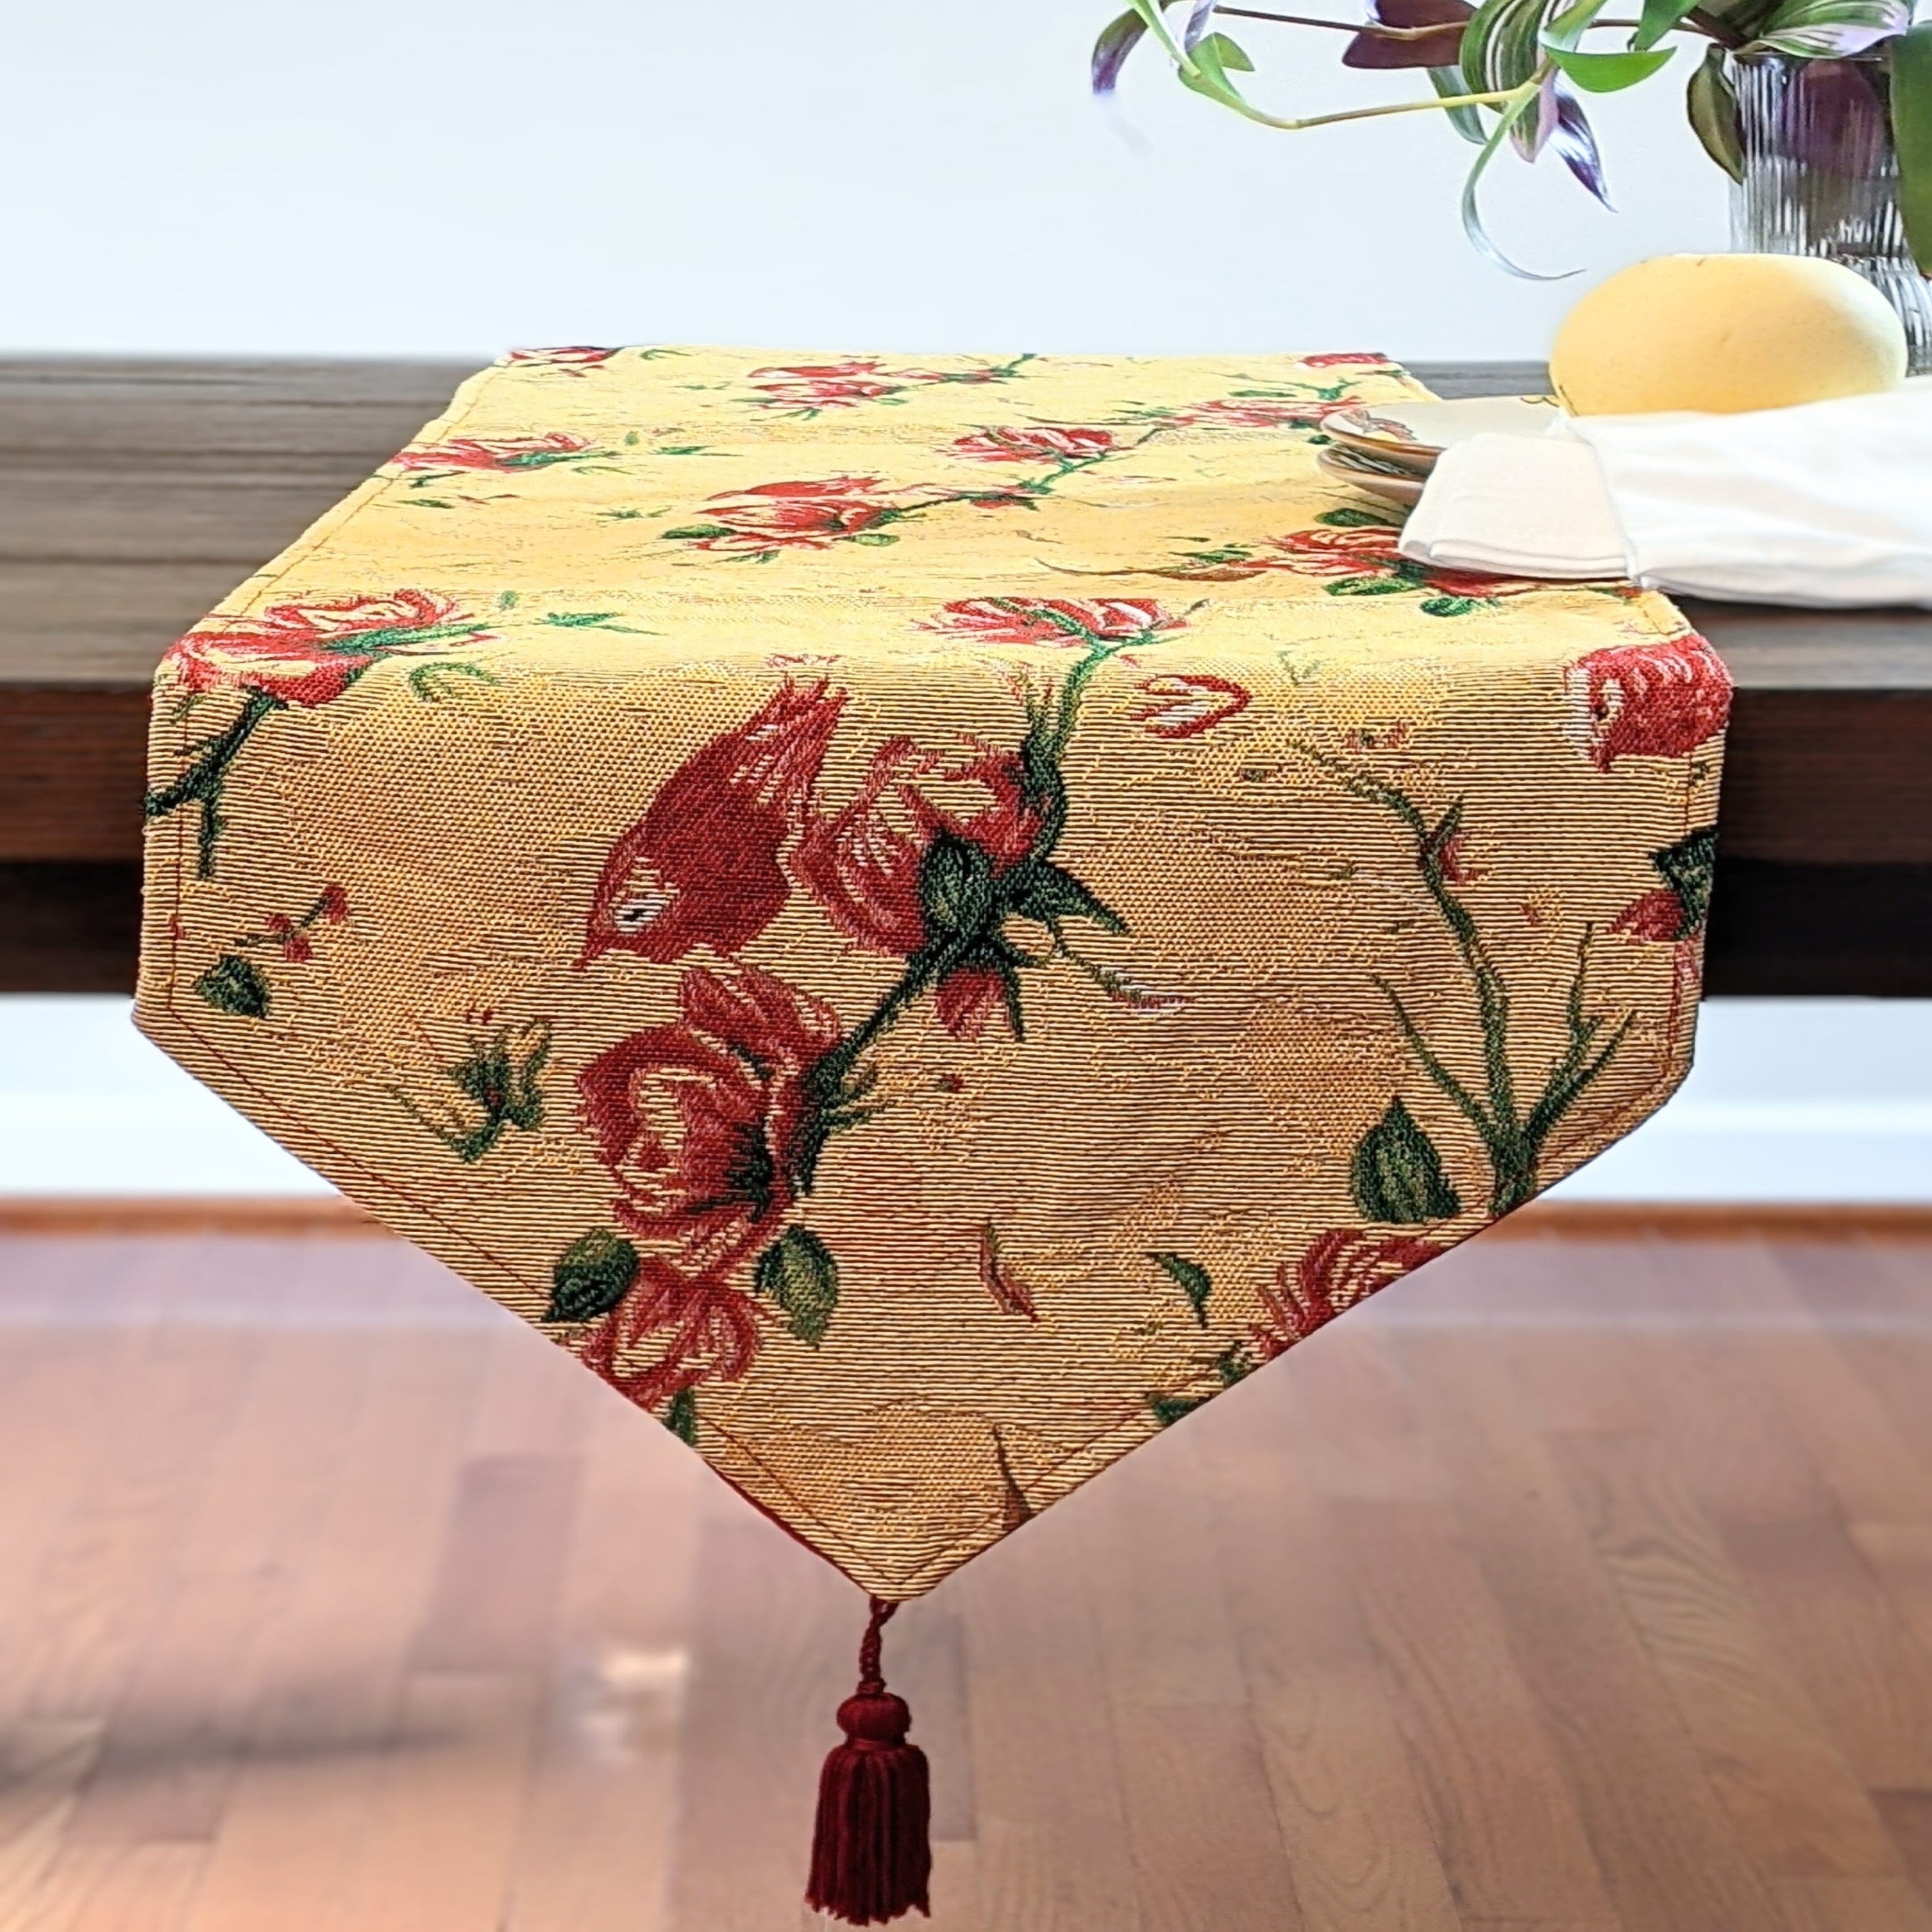 Tache Floral Red Roses Hummingbirds Golden Woven Tapestry Table Runner (18115) - Tache Home Fashion